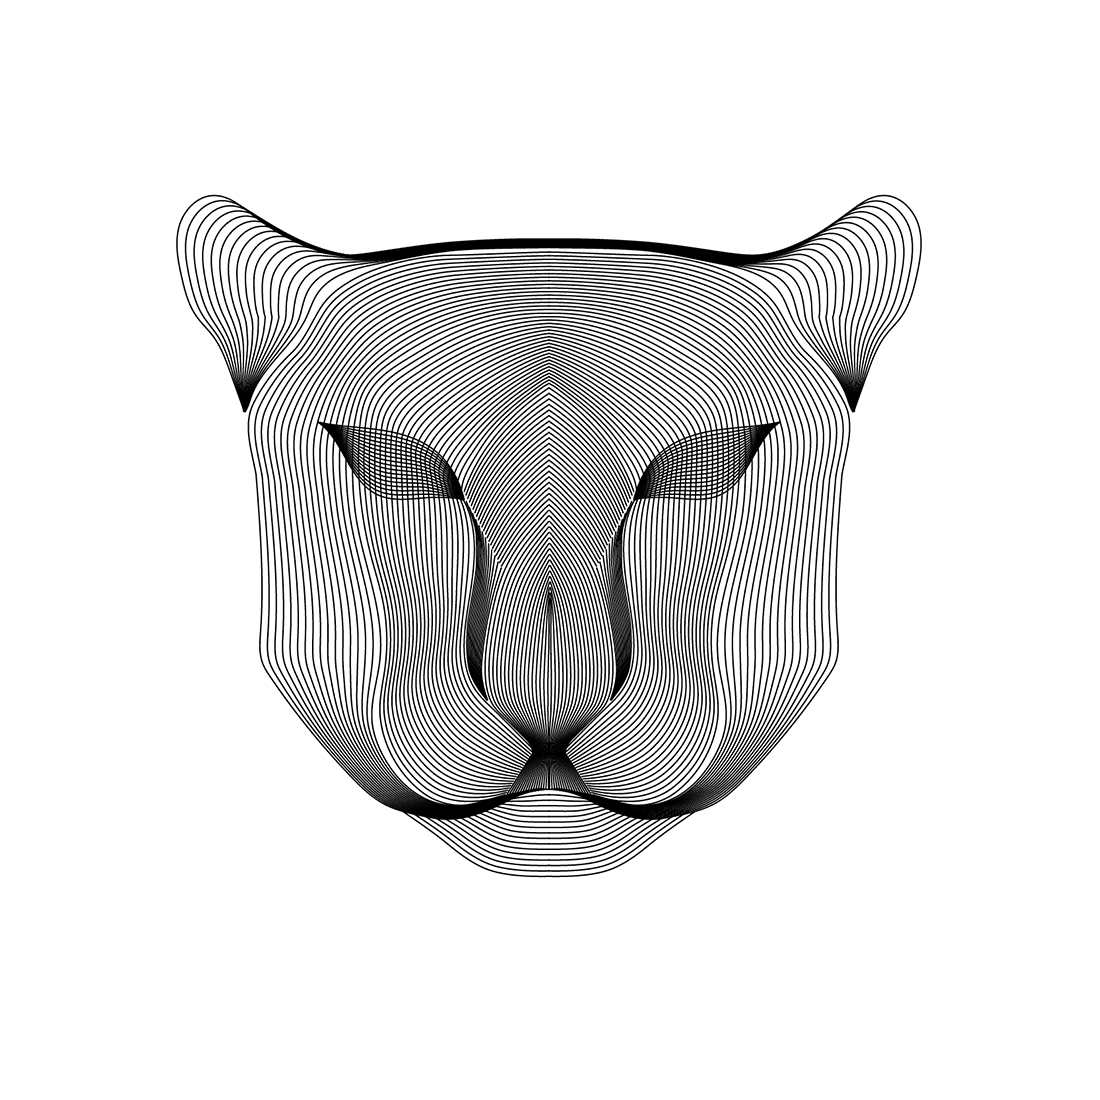 Black and white drawing of a cat's face.